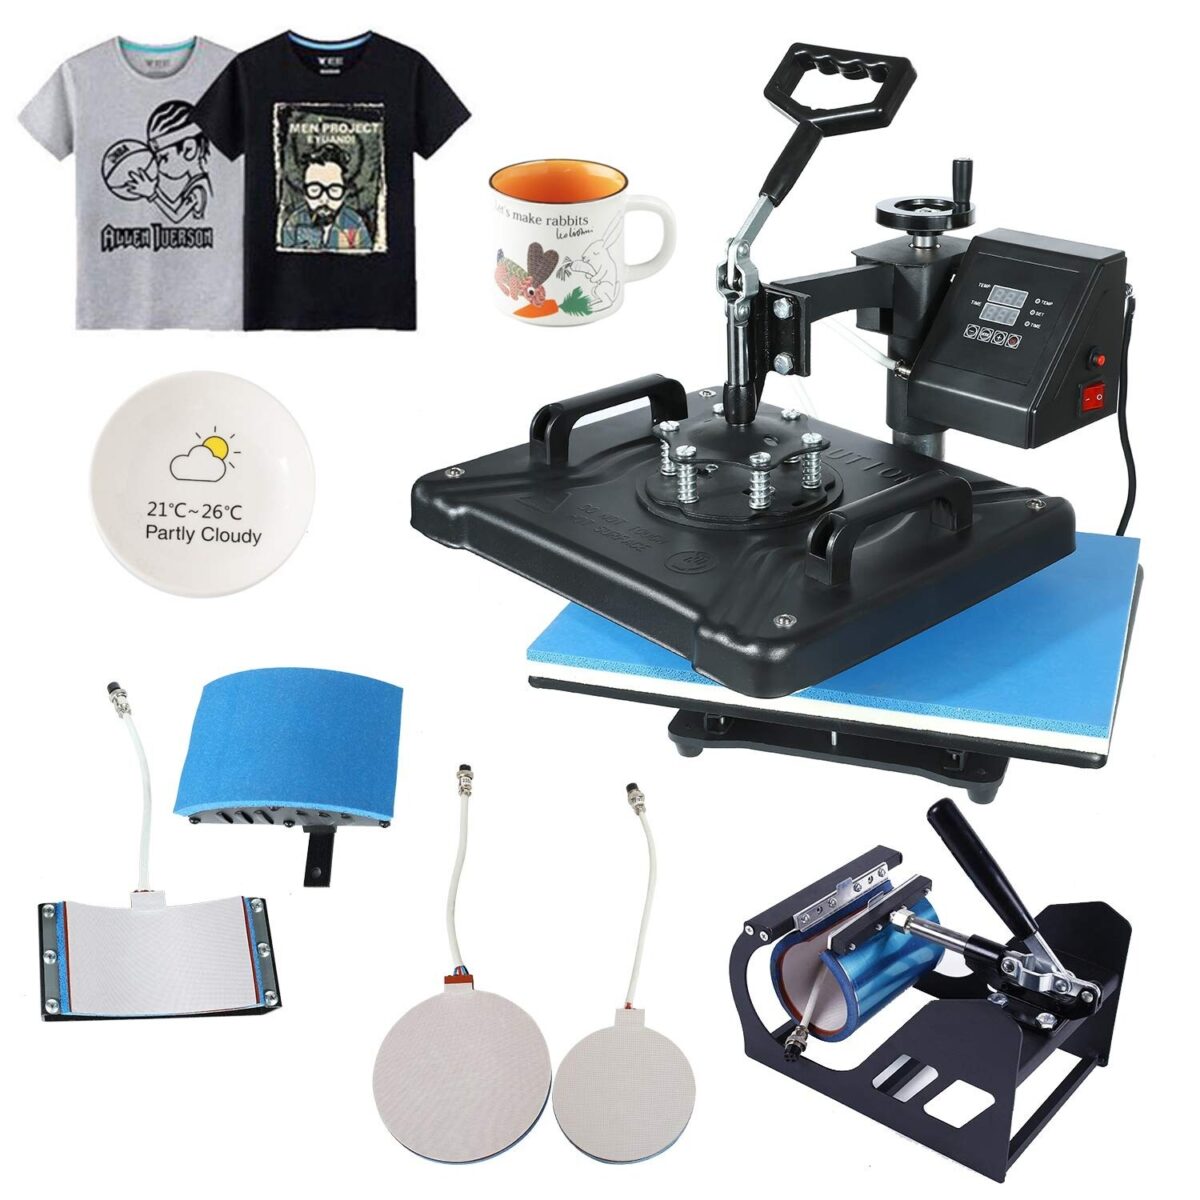 luckypet-Digital-Hot-Press-Sublimation-Machine-for-T-shirt-Printing